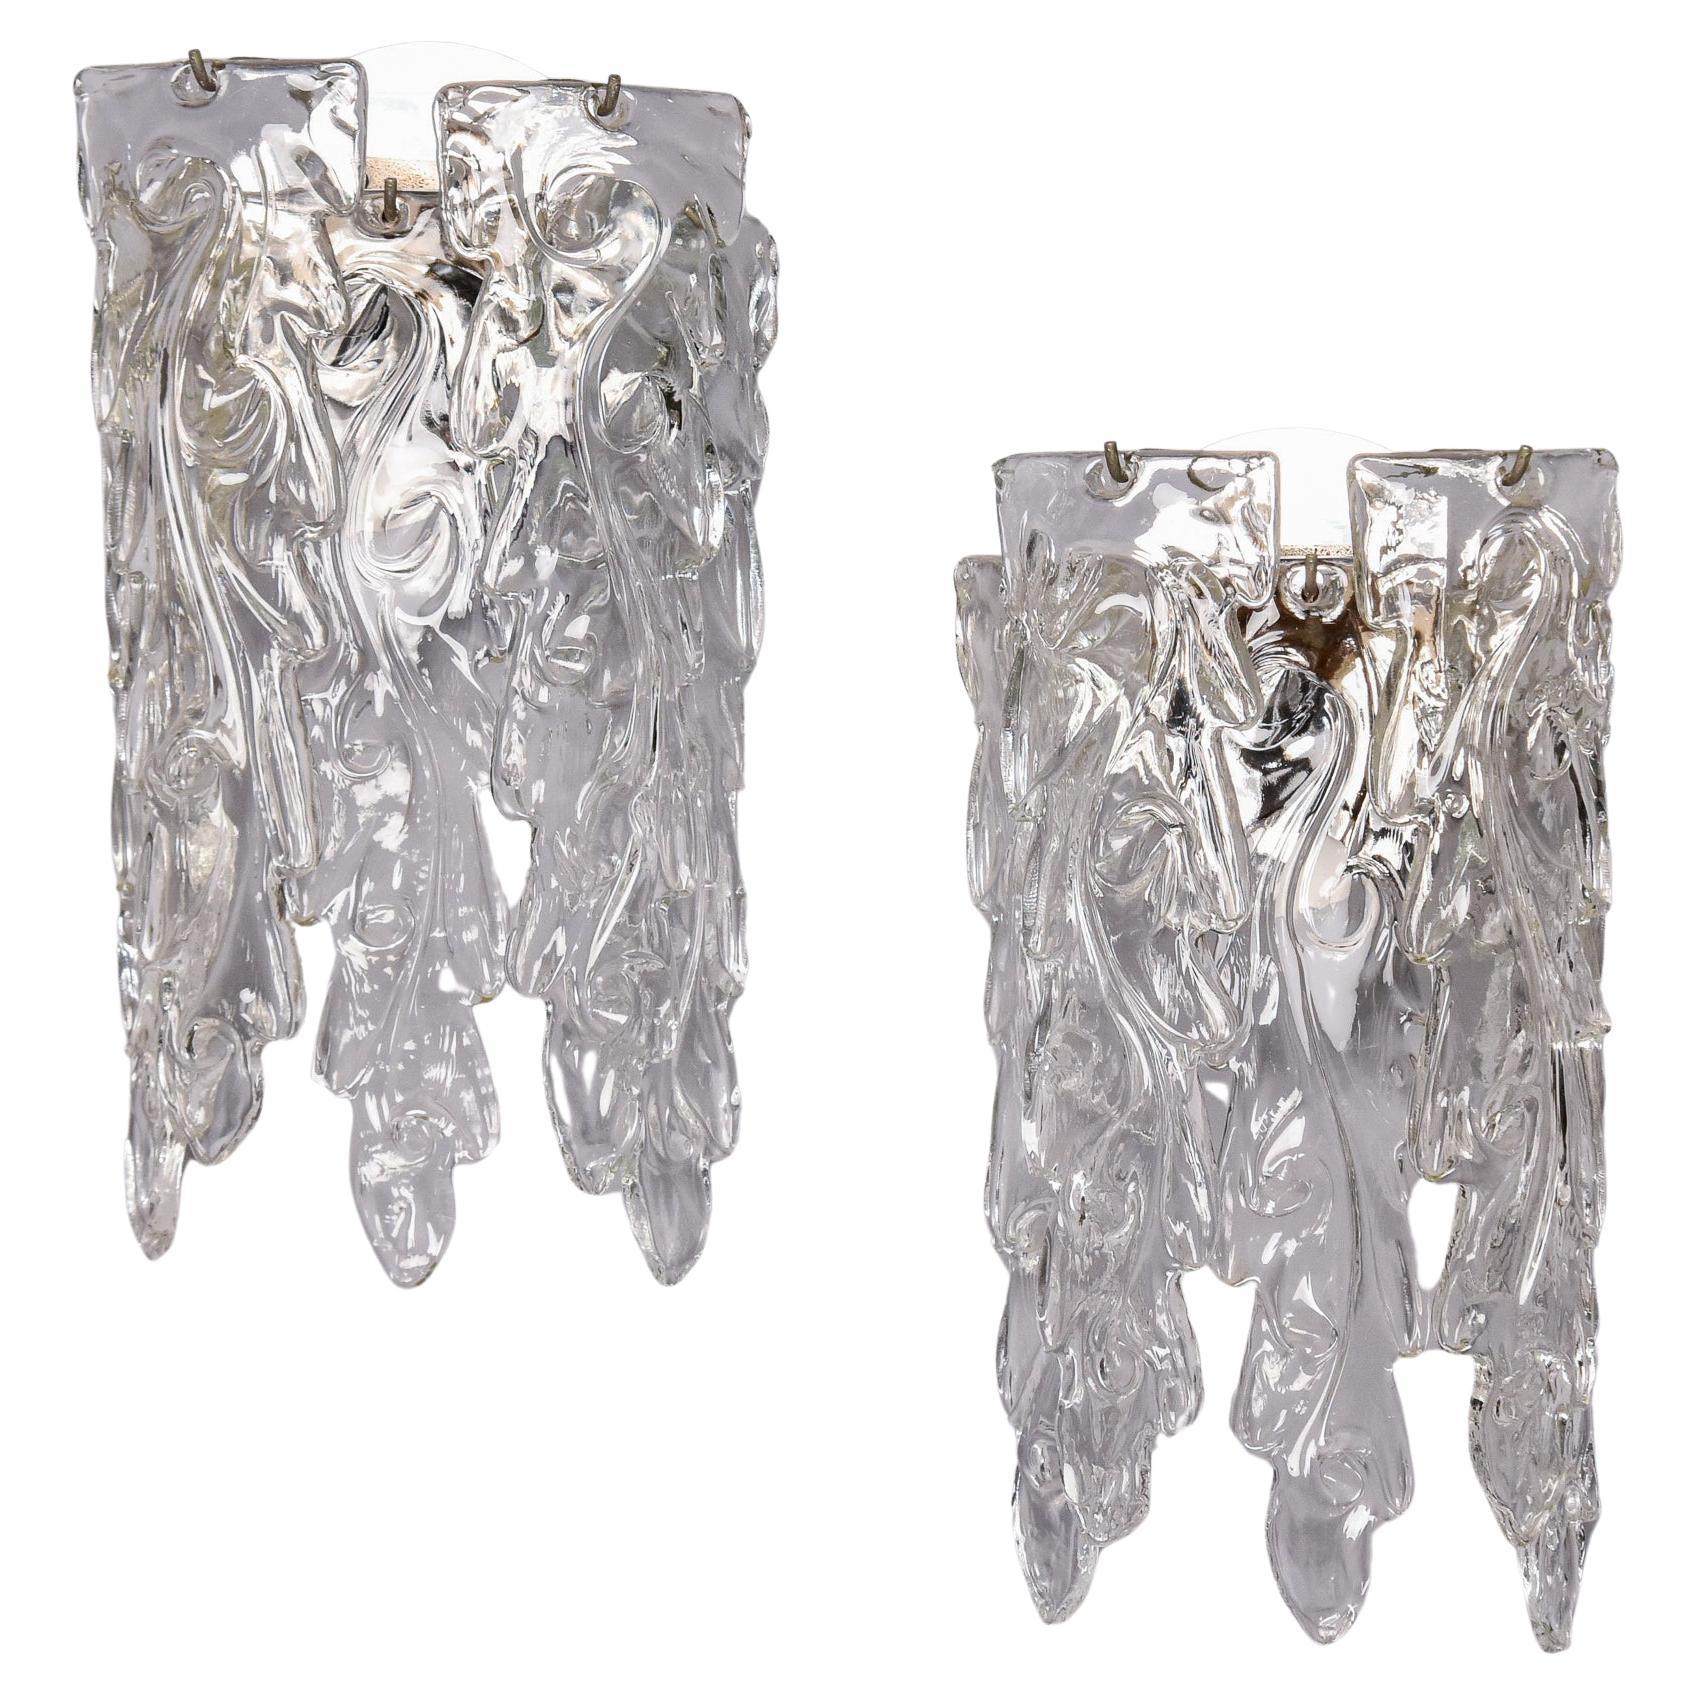 Pair of Mid Century Sconces with Murano Glass Pendants Attributed to Barovier  For Sale